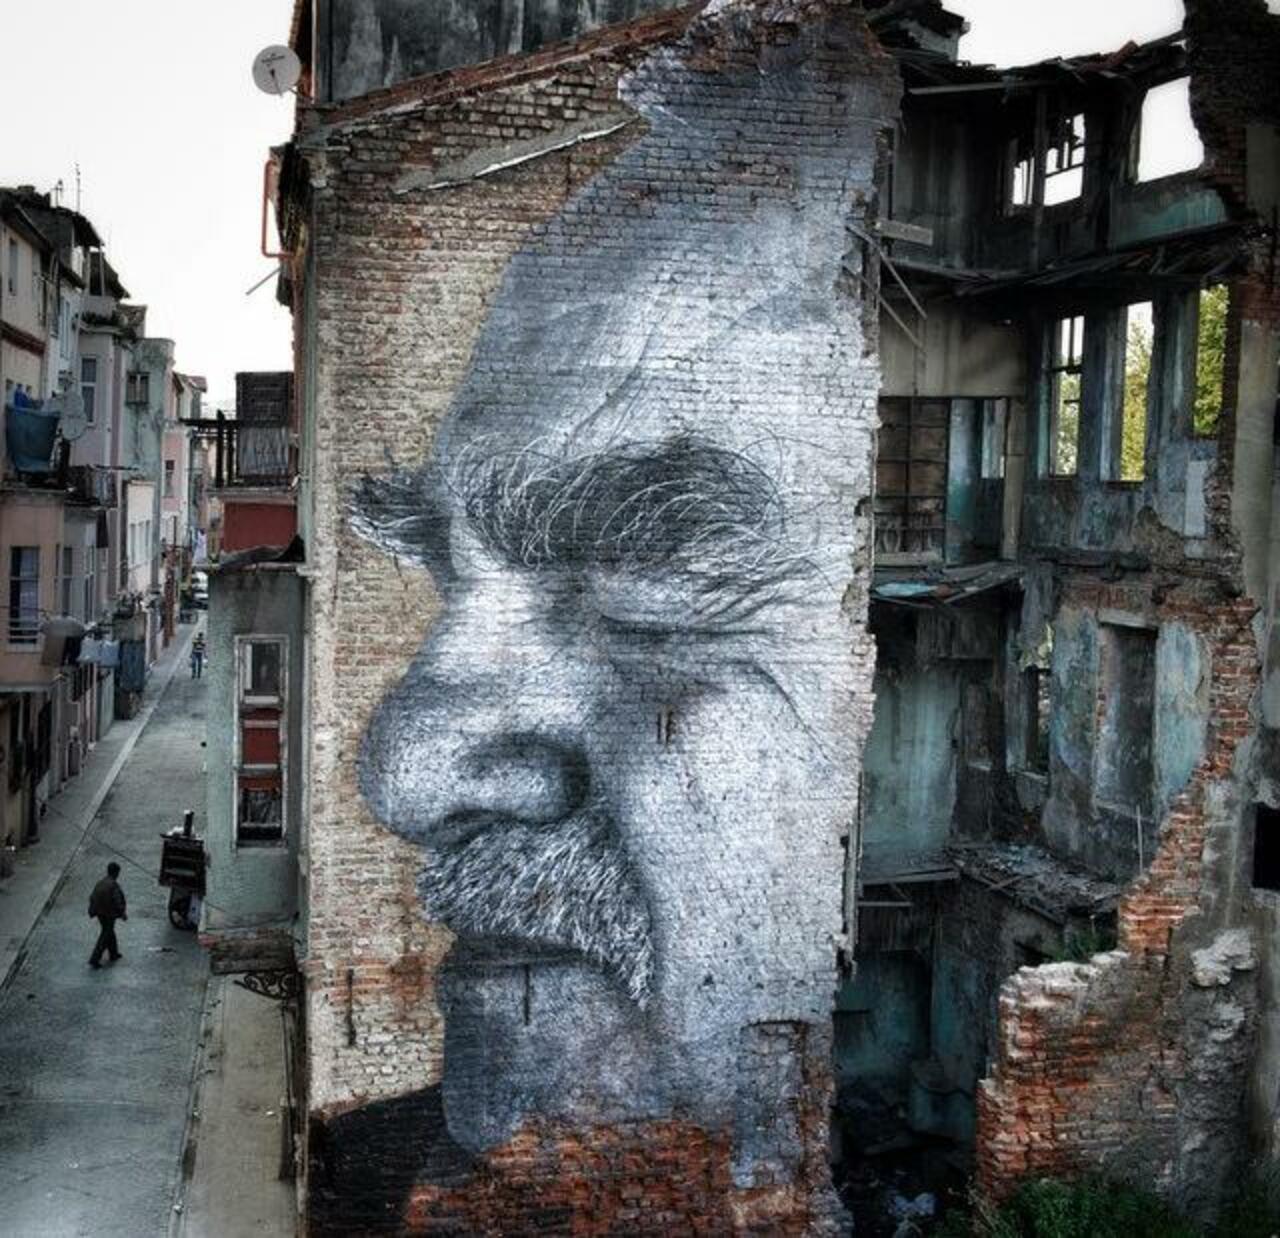 Street Art by JR in Istanbul & after local police painted over it 

#art #arte #graffiti #streetart http://t.co/ajaVwhnlBW